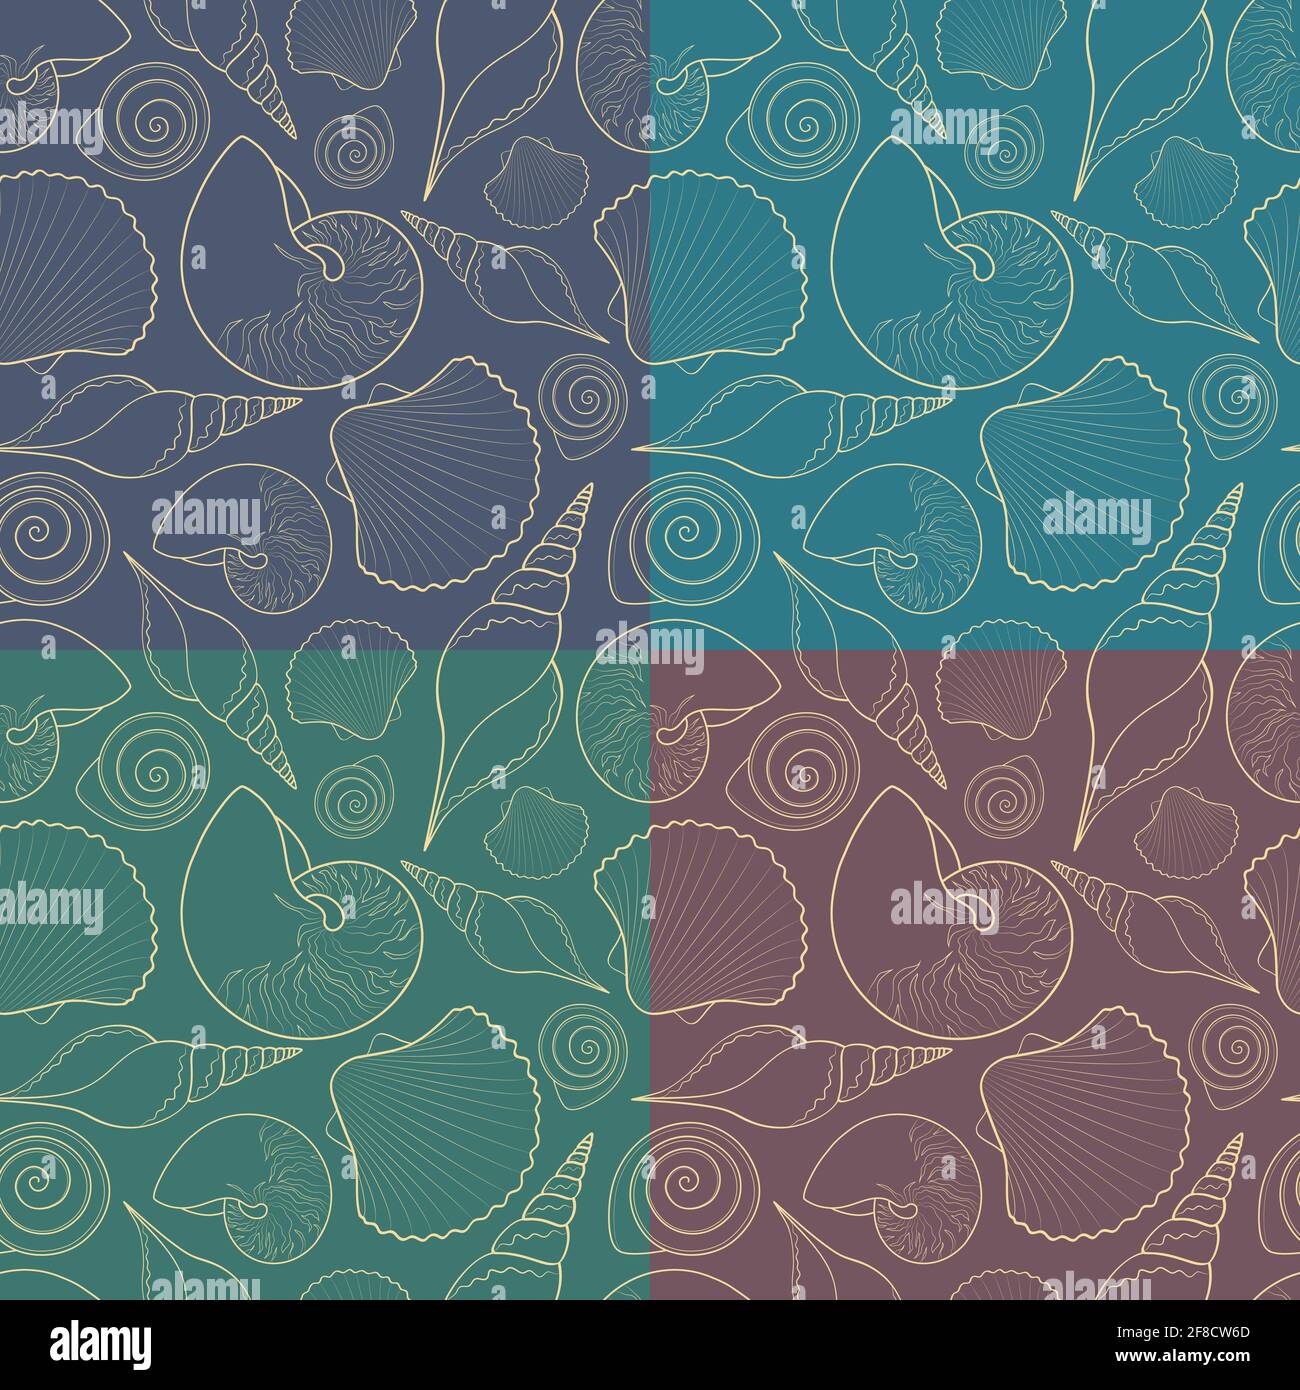 Set of vector seamless patterns with shells. Stock Vector